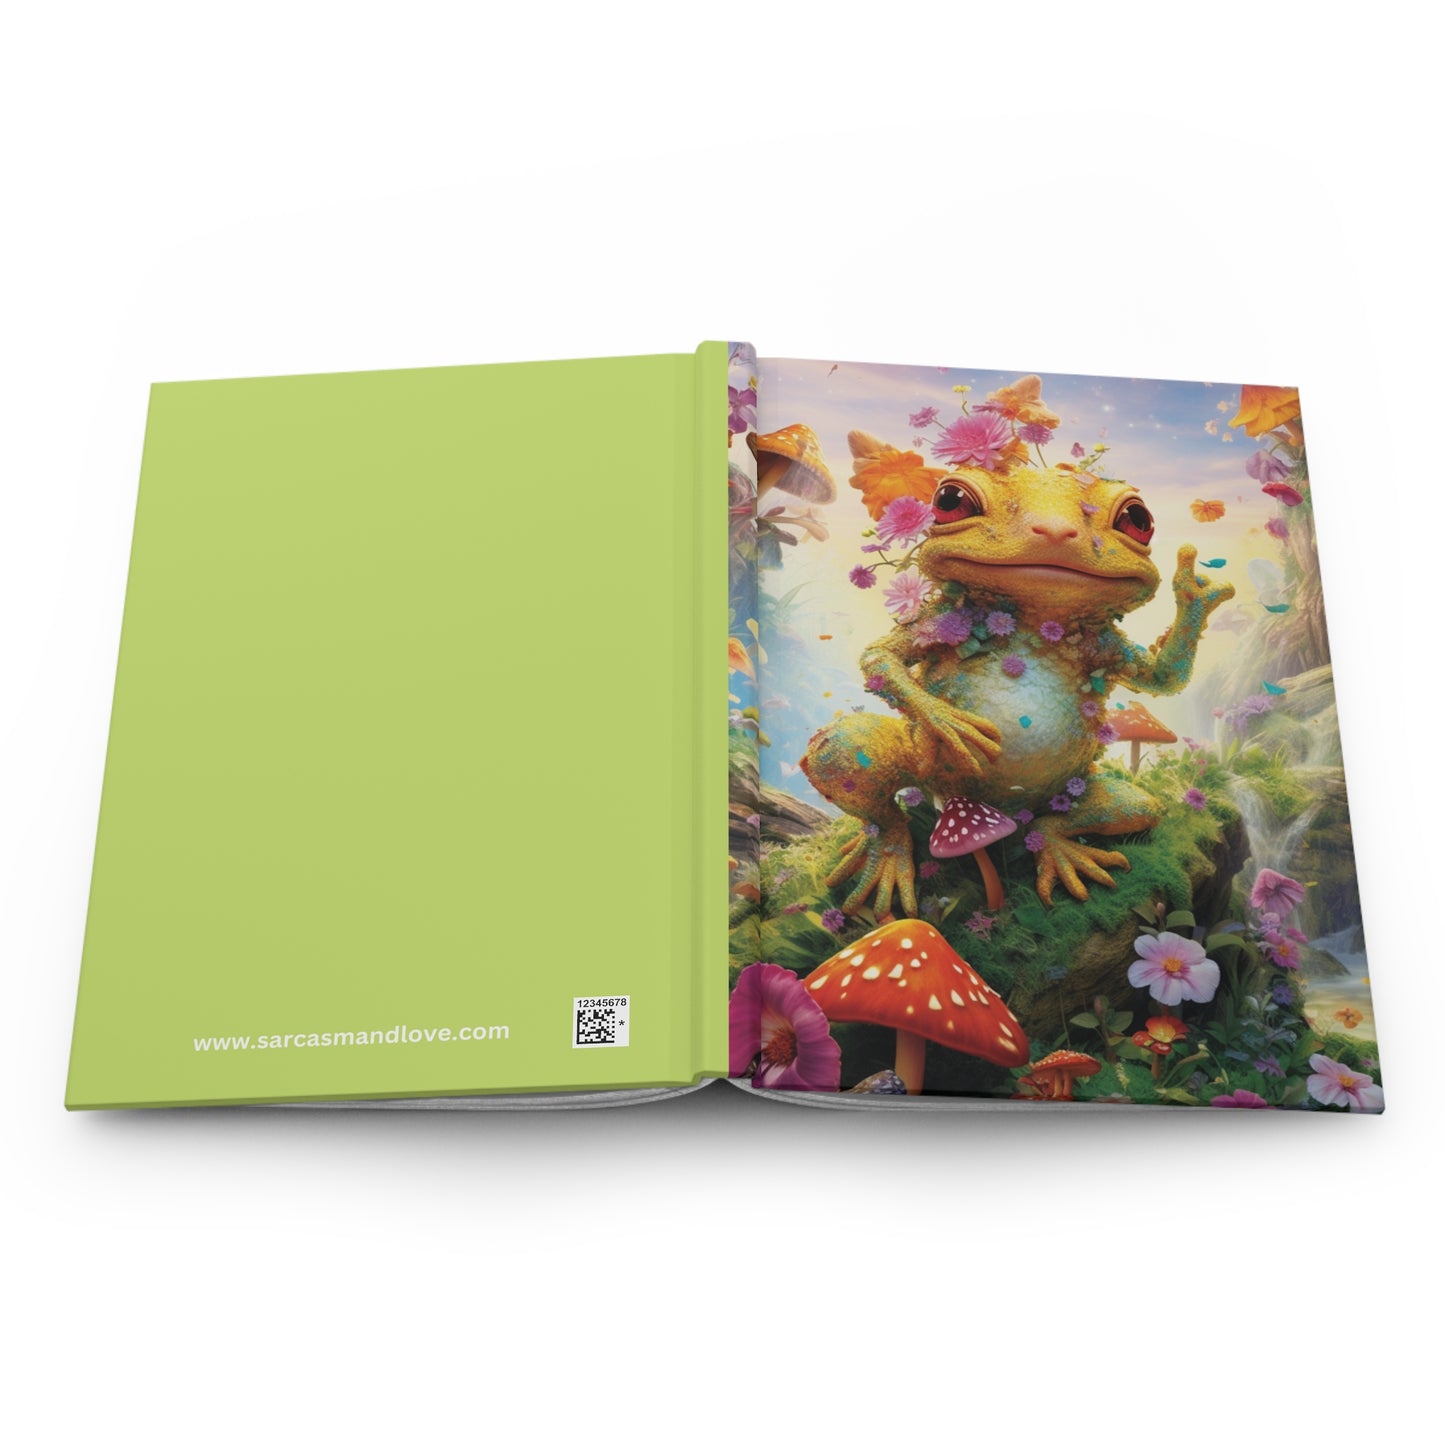 Frog & Floral Mushroom Hardcover Journal Notebook - Nature-Inspired Writing Diary, Self-Care Reflection, Mindfulness Sketchbook, 5.75"x7.5"